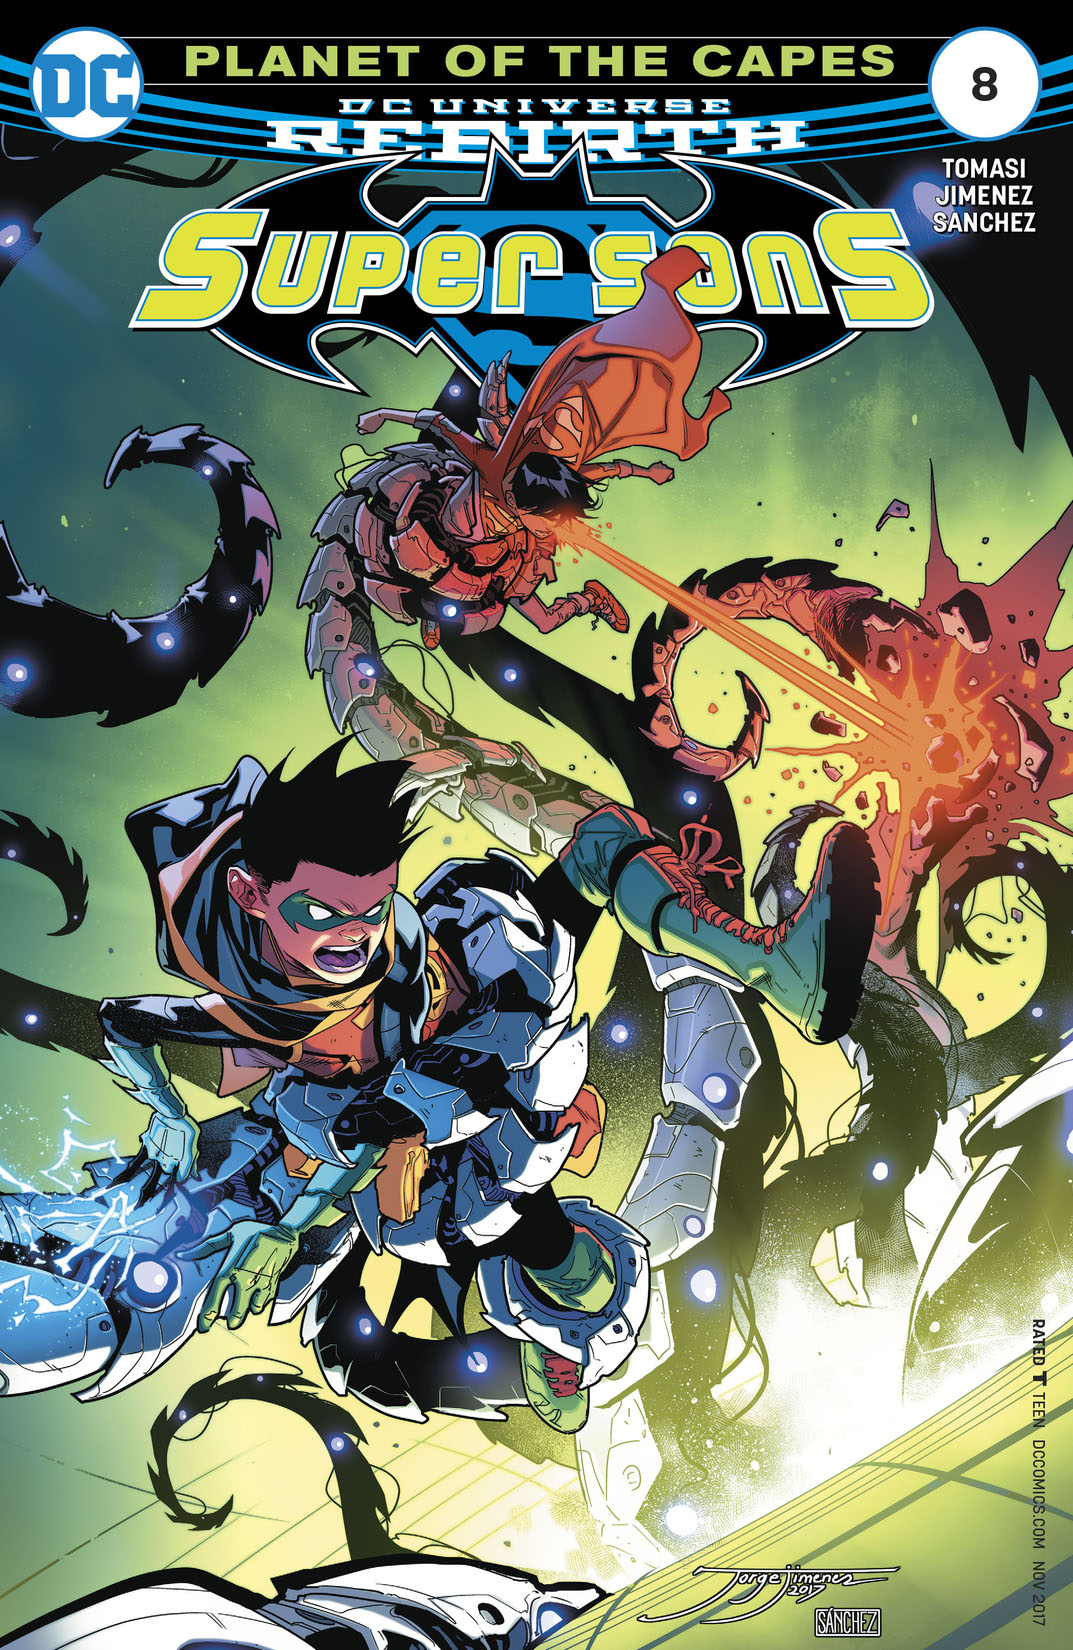 Super Sons (2017-) #8 preview images